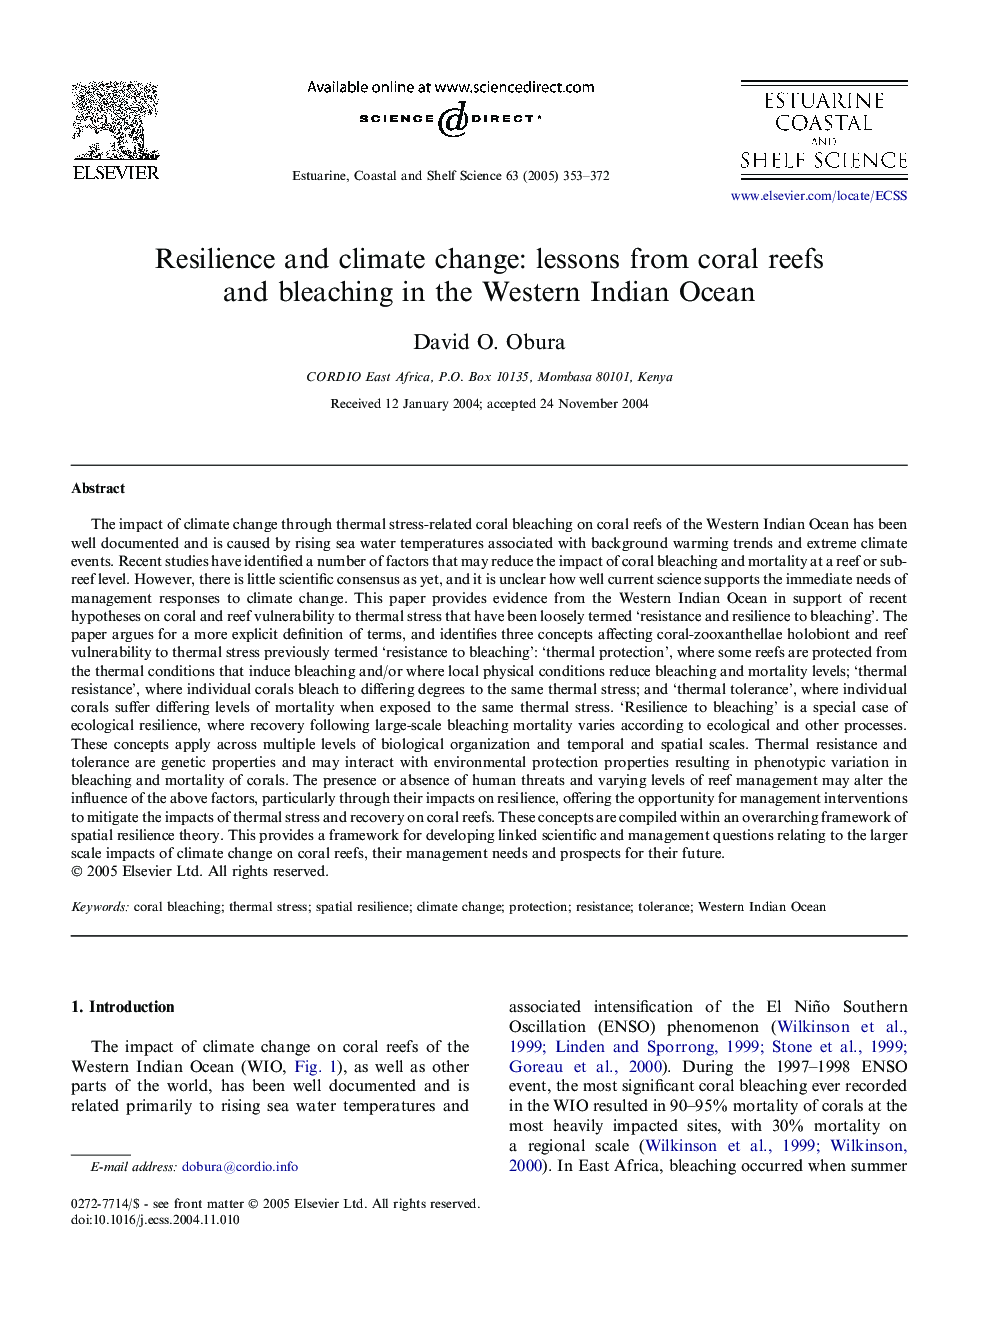 Resilience and climate change: lessons from coral reefs and bleaching in the Western Indian Ocean